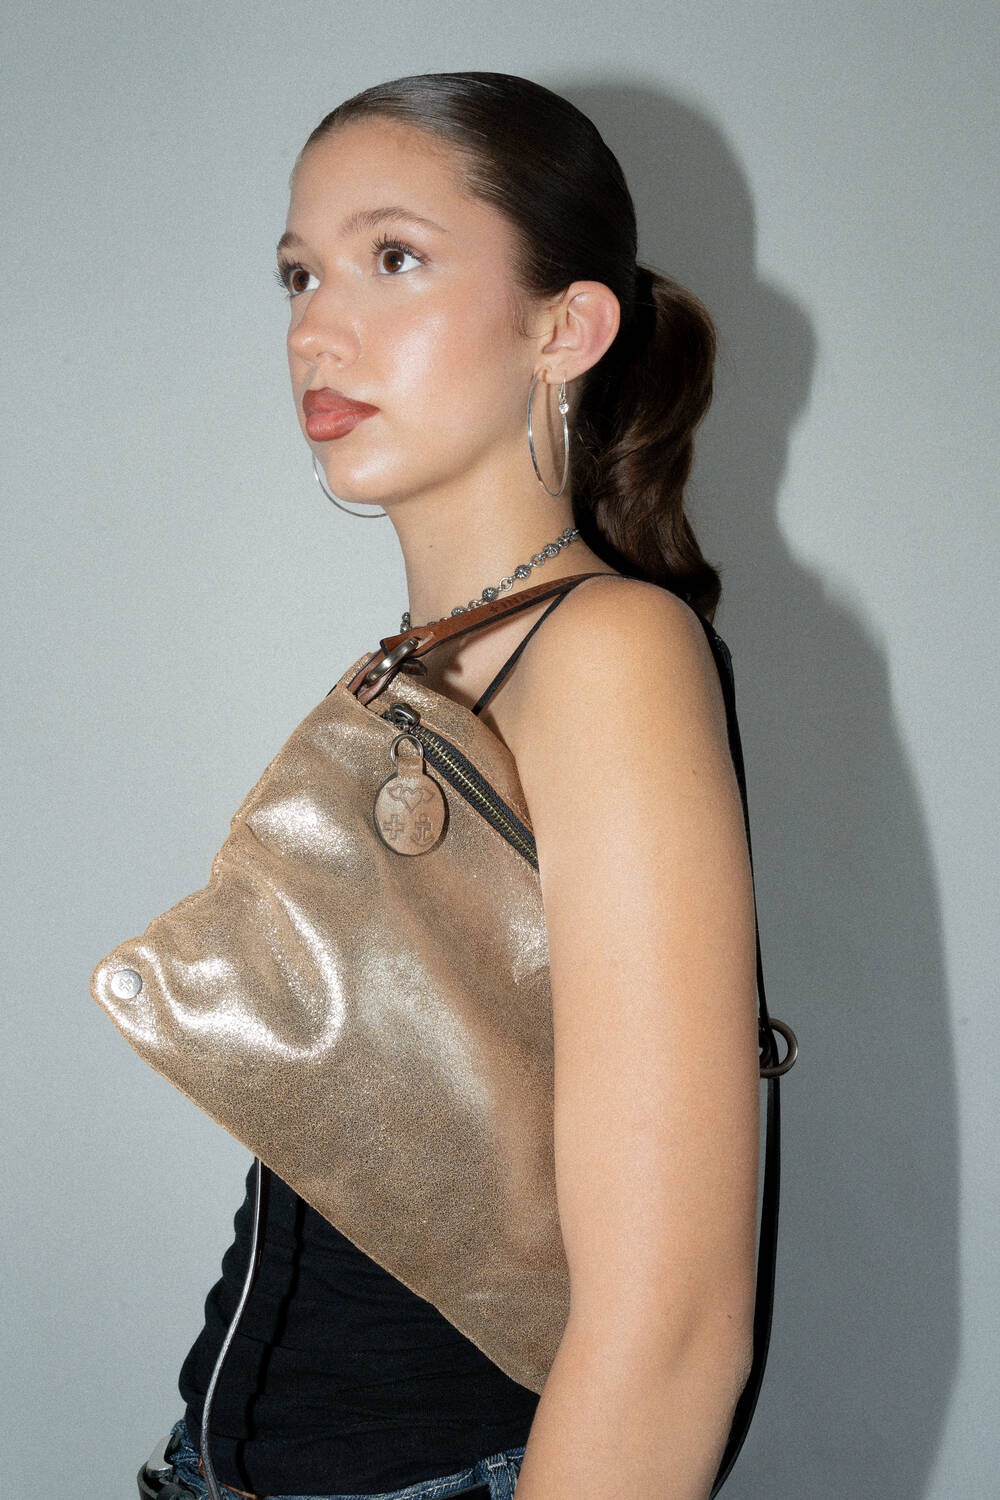 A person with hoop earrings and a sleek ponytail poses against a gray background, wearing a black top and an INA KENT metallic gold sling bag.